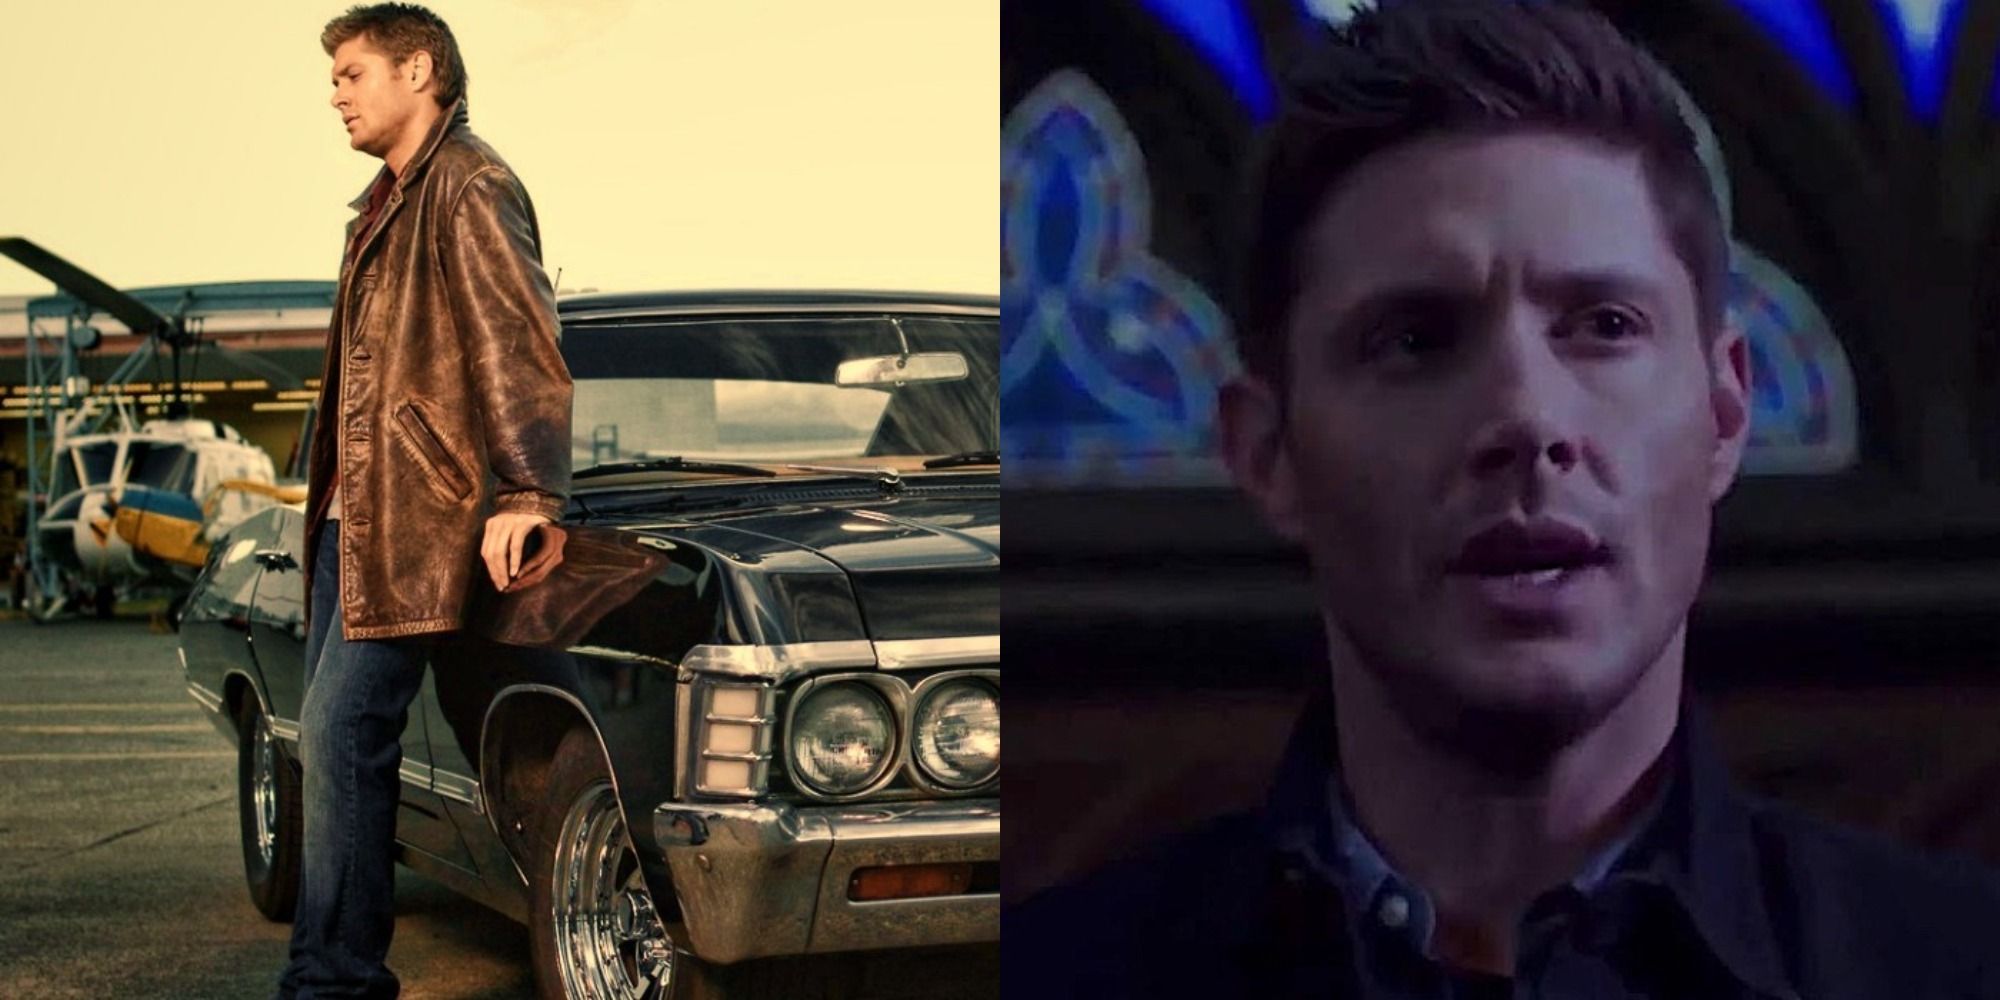 Dean resting against the car and talking in front of stained glass windows in Supernatural